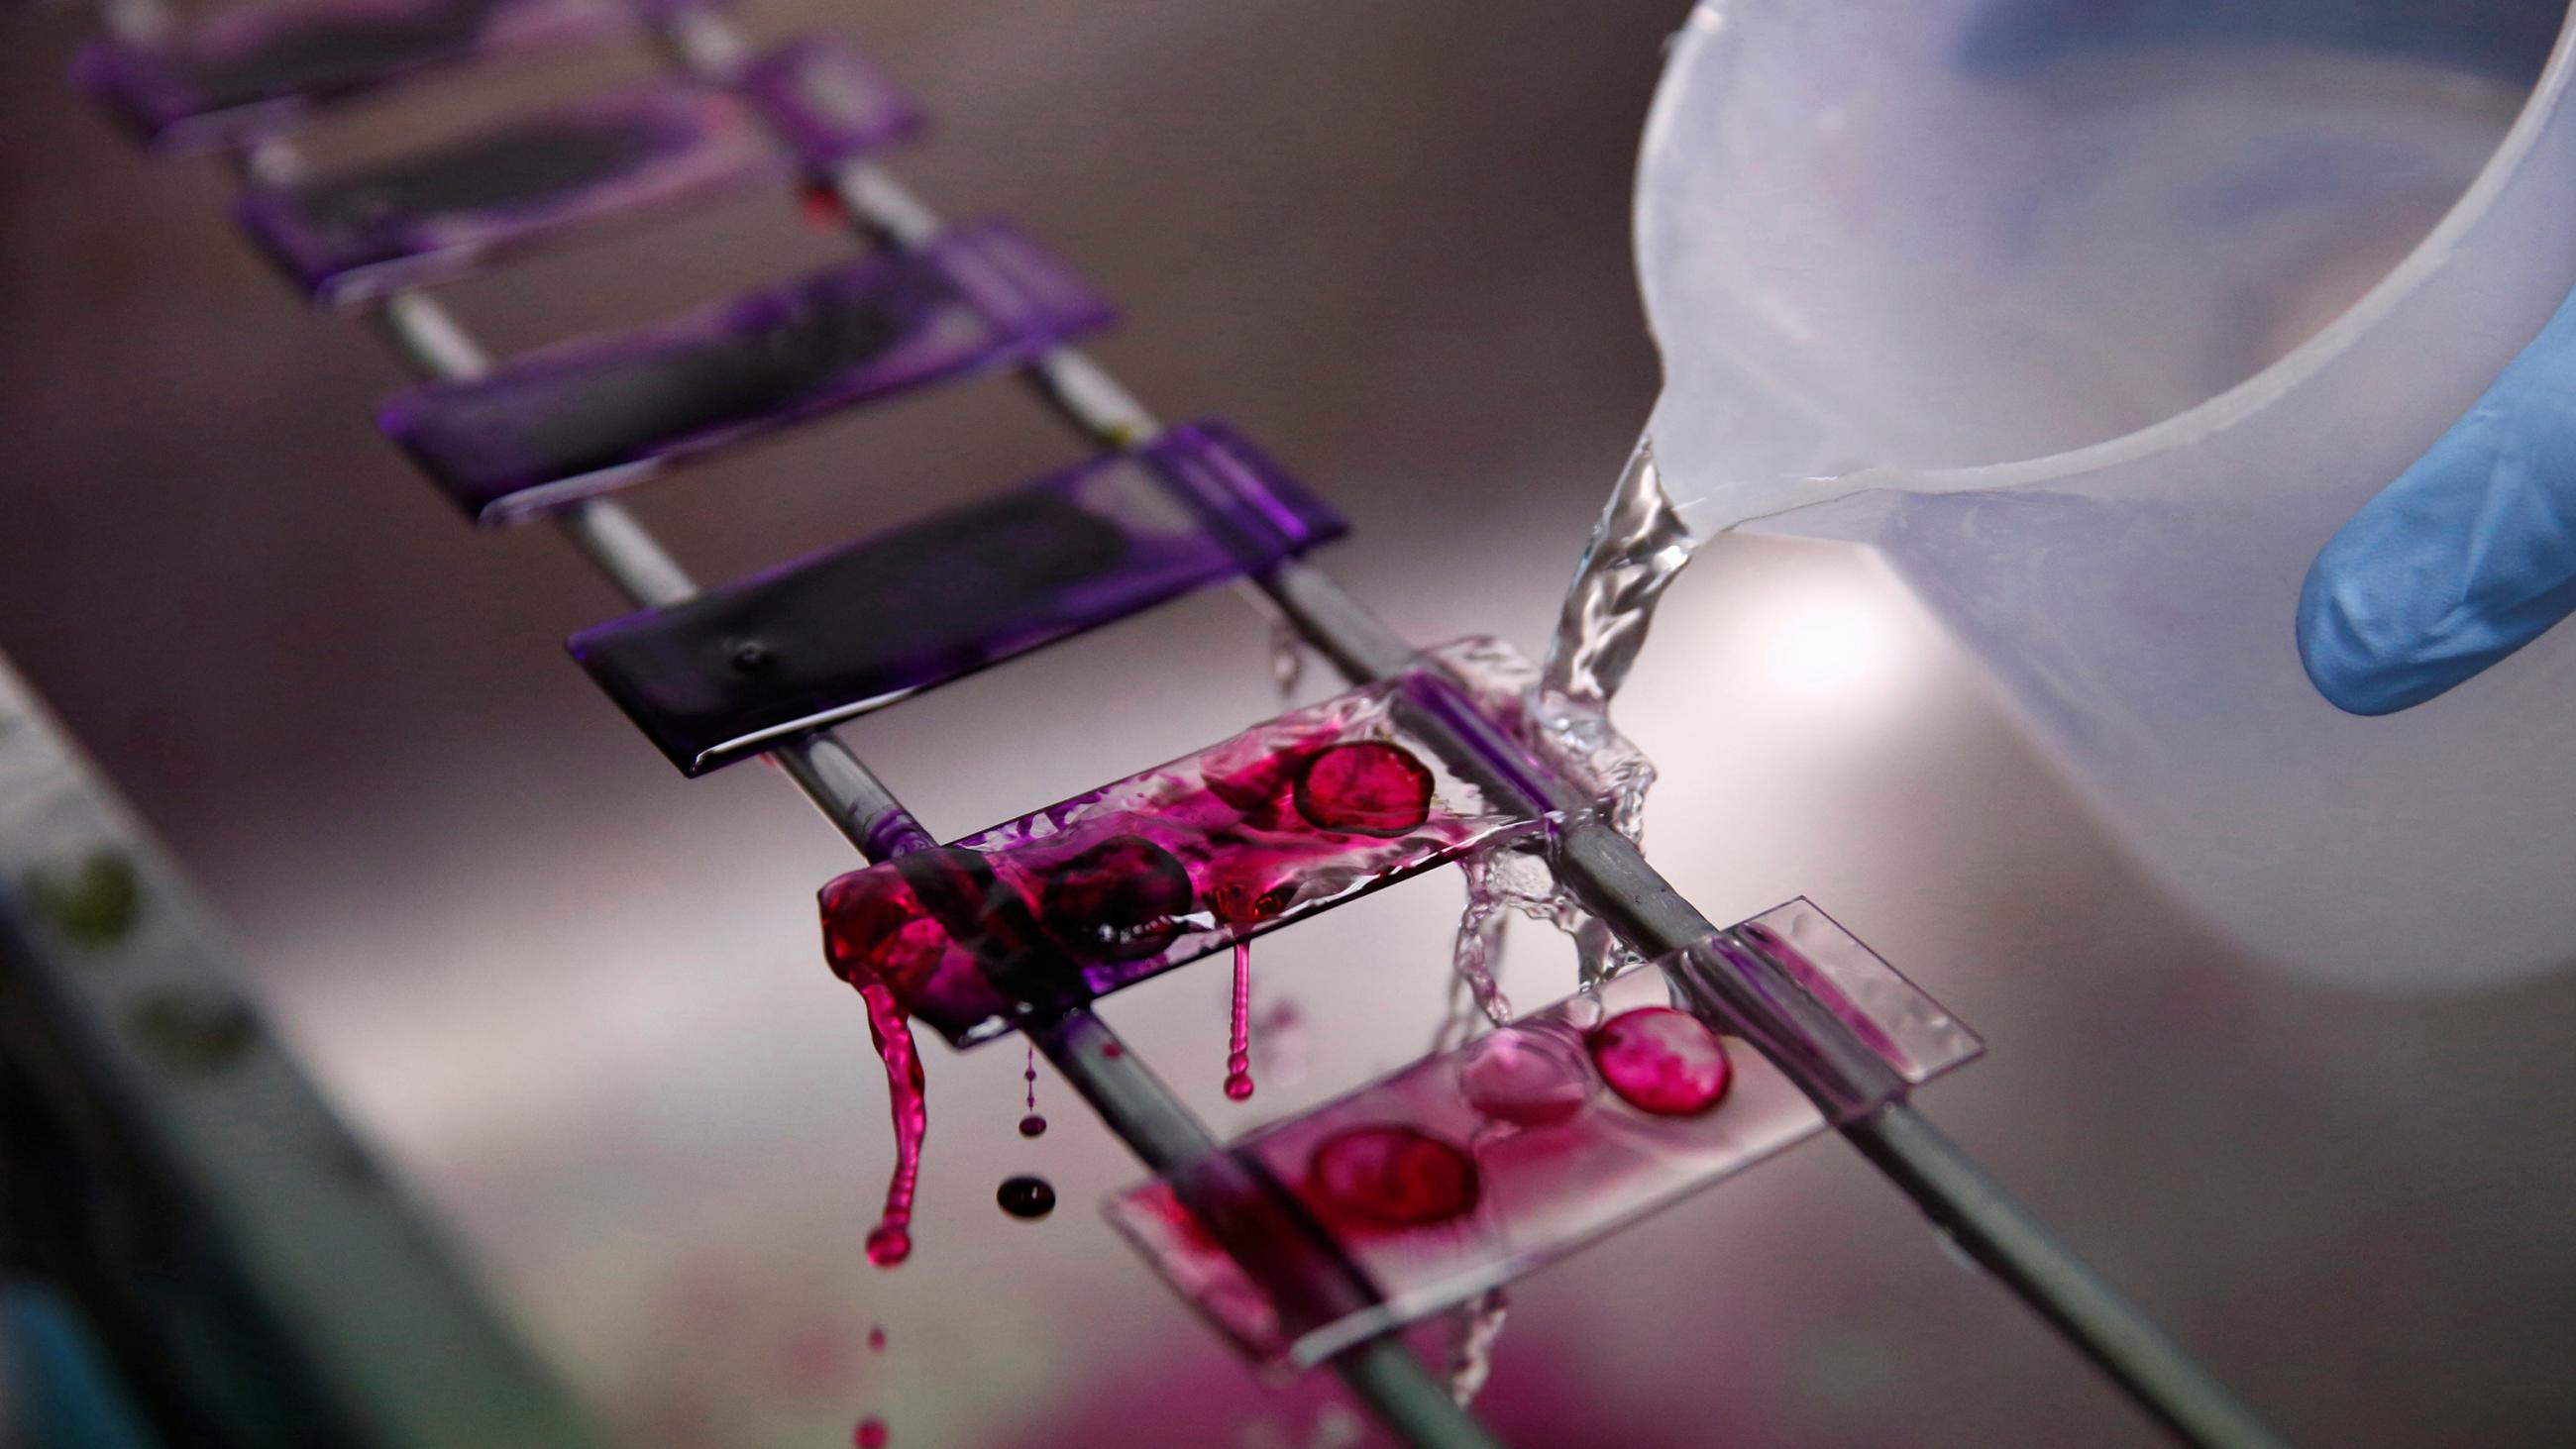 The image shows a splashing liquid being washed across glass plates each of which is dotted with what appears to be a blood drop sample. 